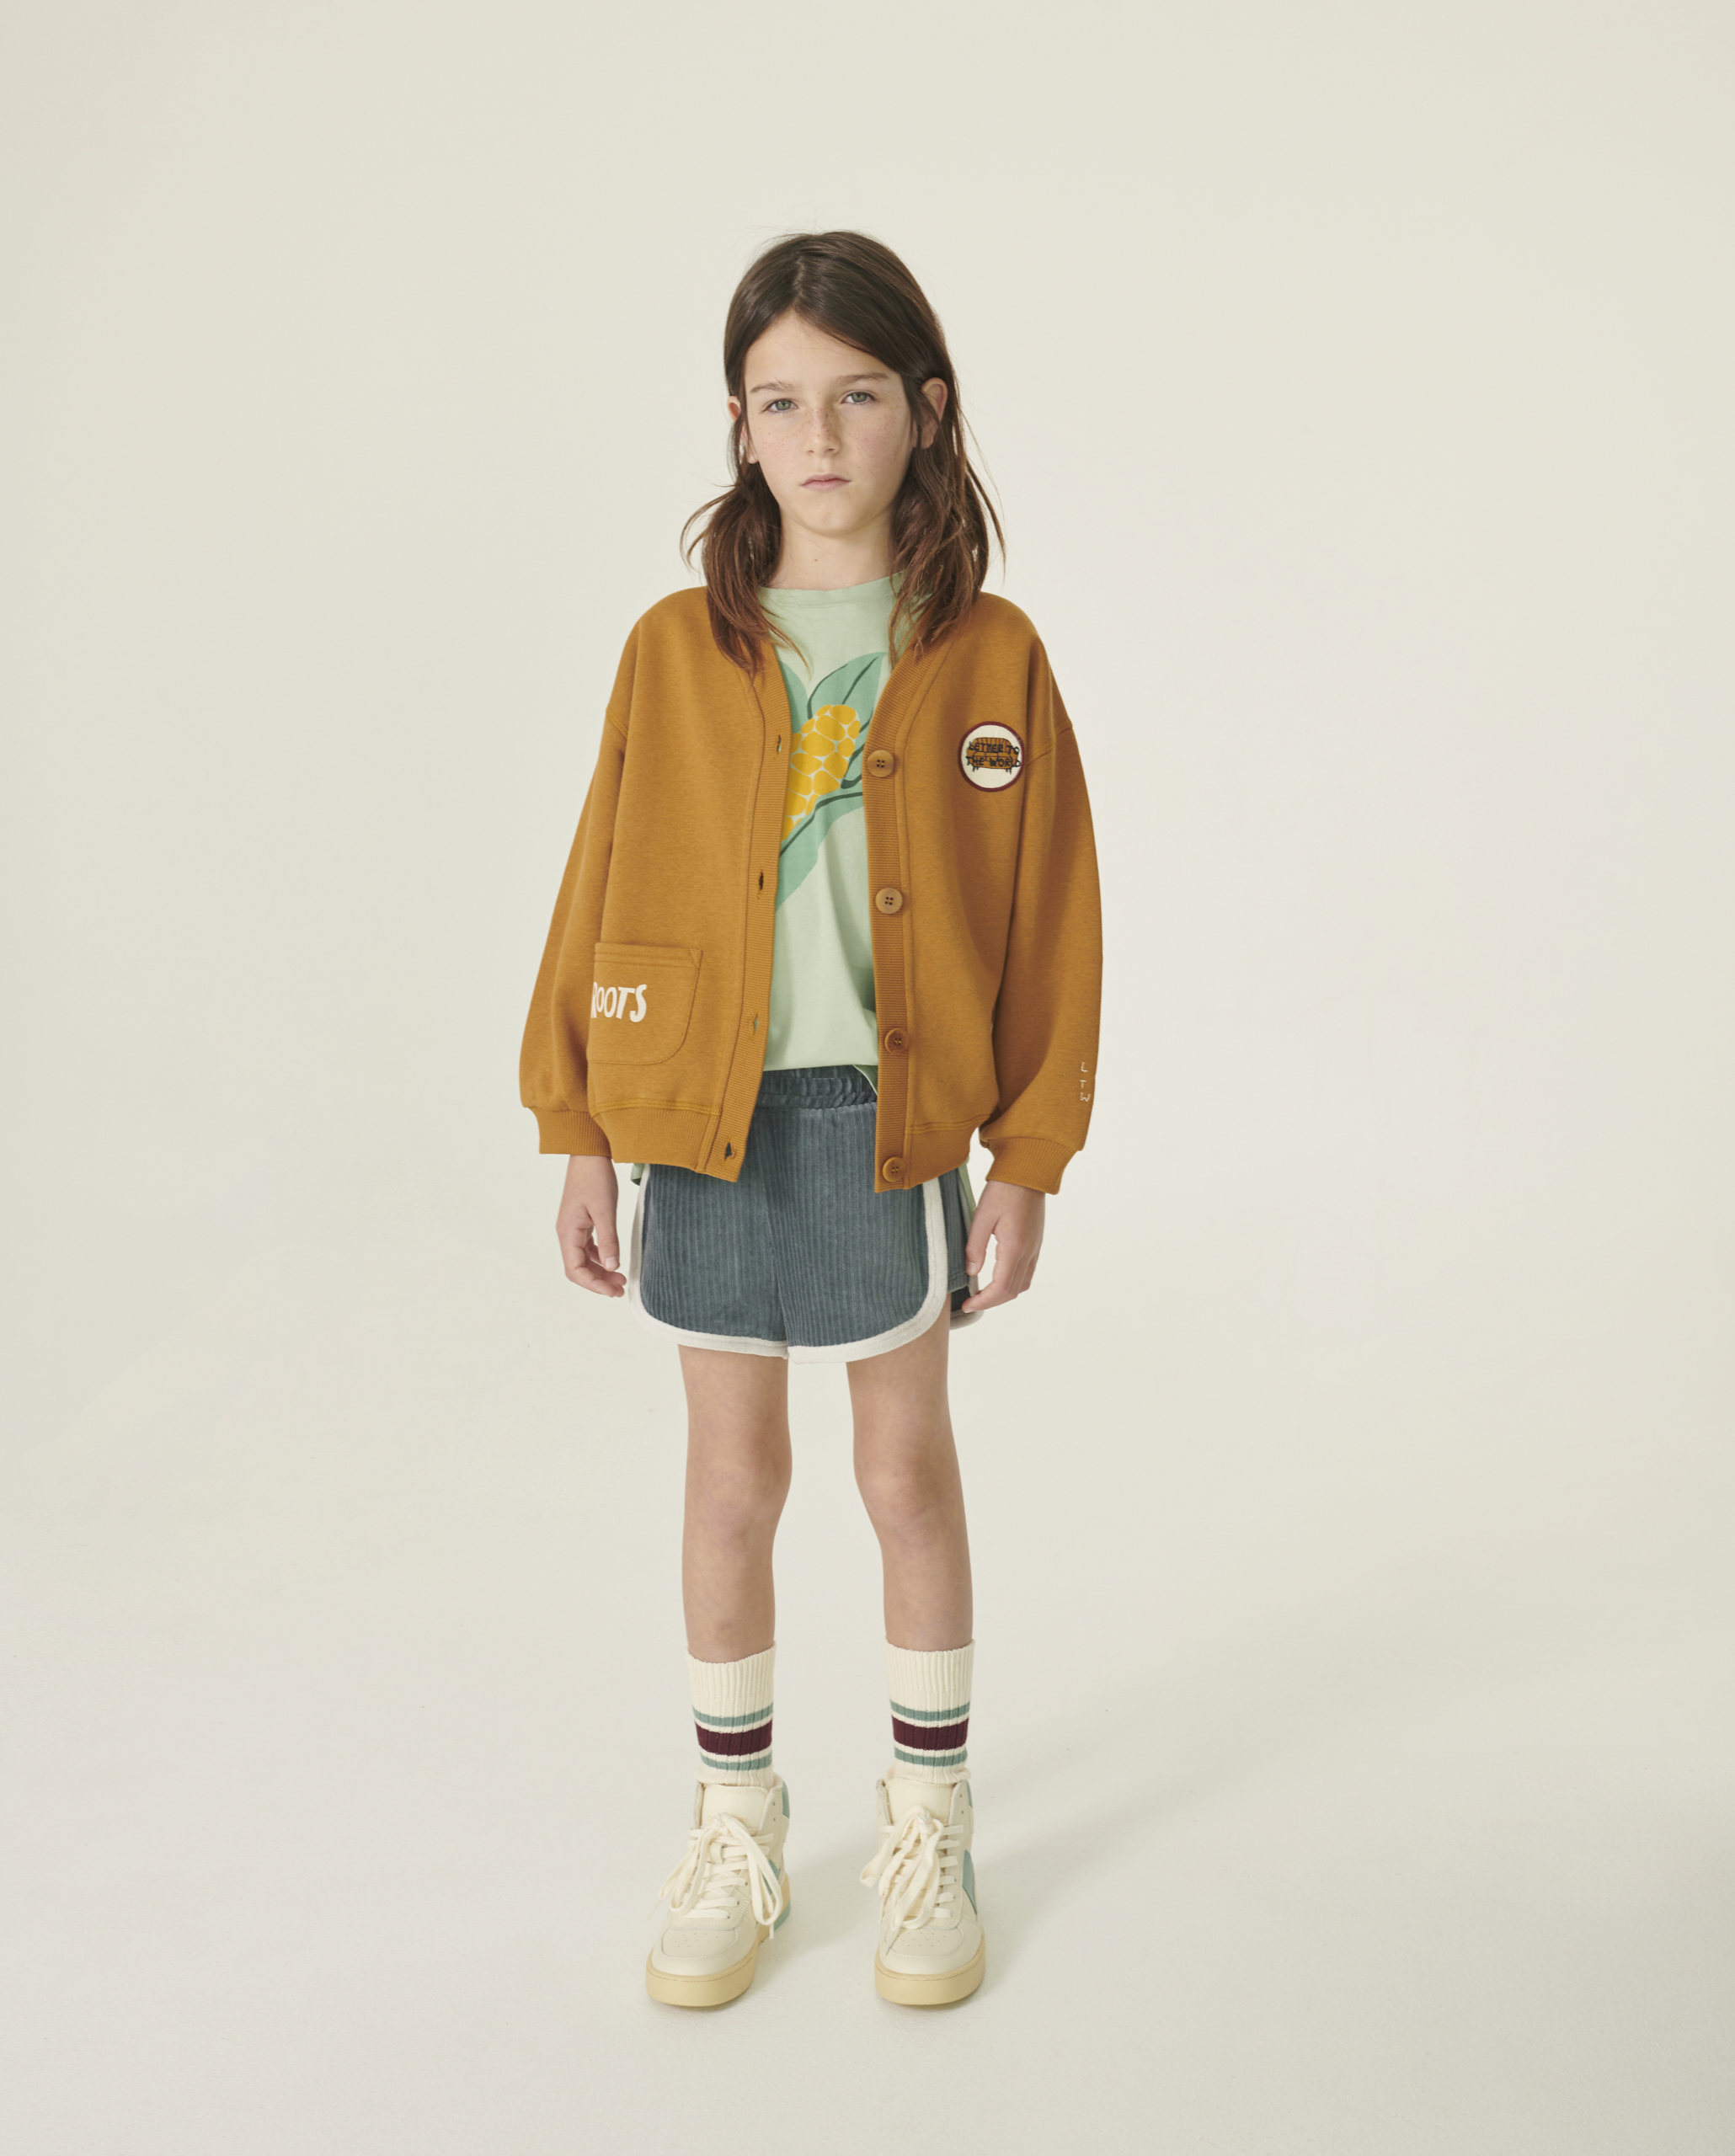 Letter to the World - Kids sustainable fashion